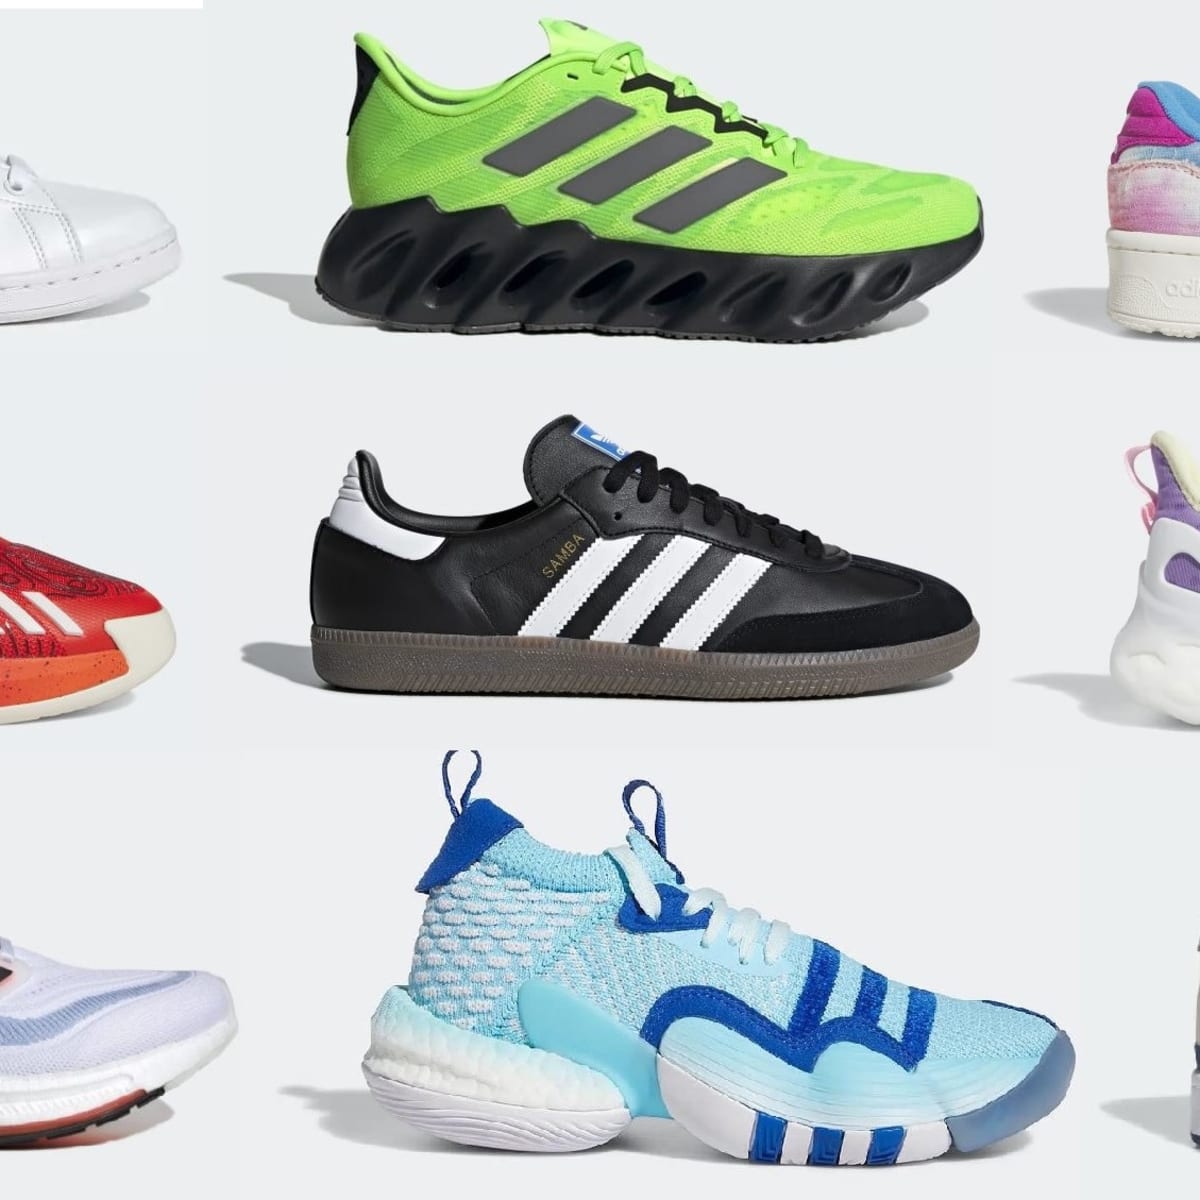 The 8 Best Tennis Shoes of 2023 - Sports Illustrated